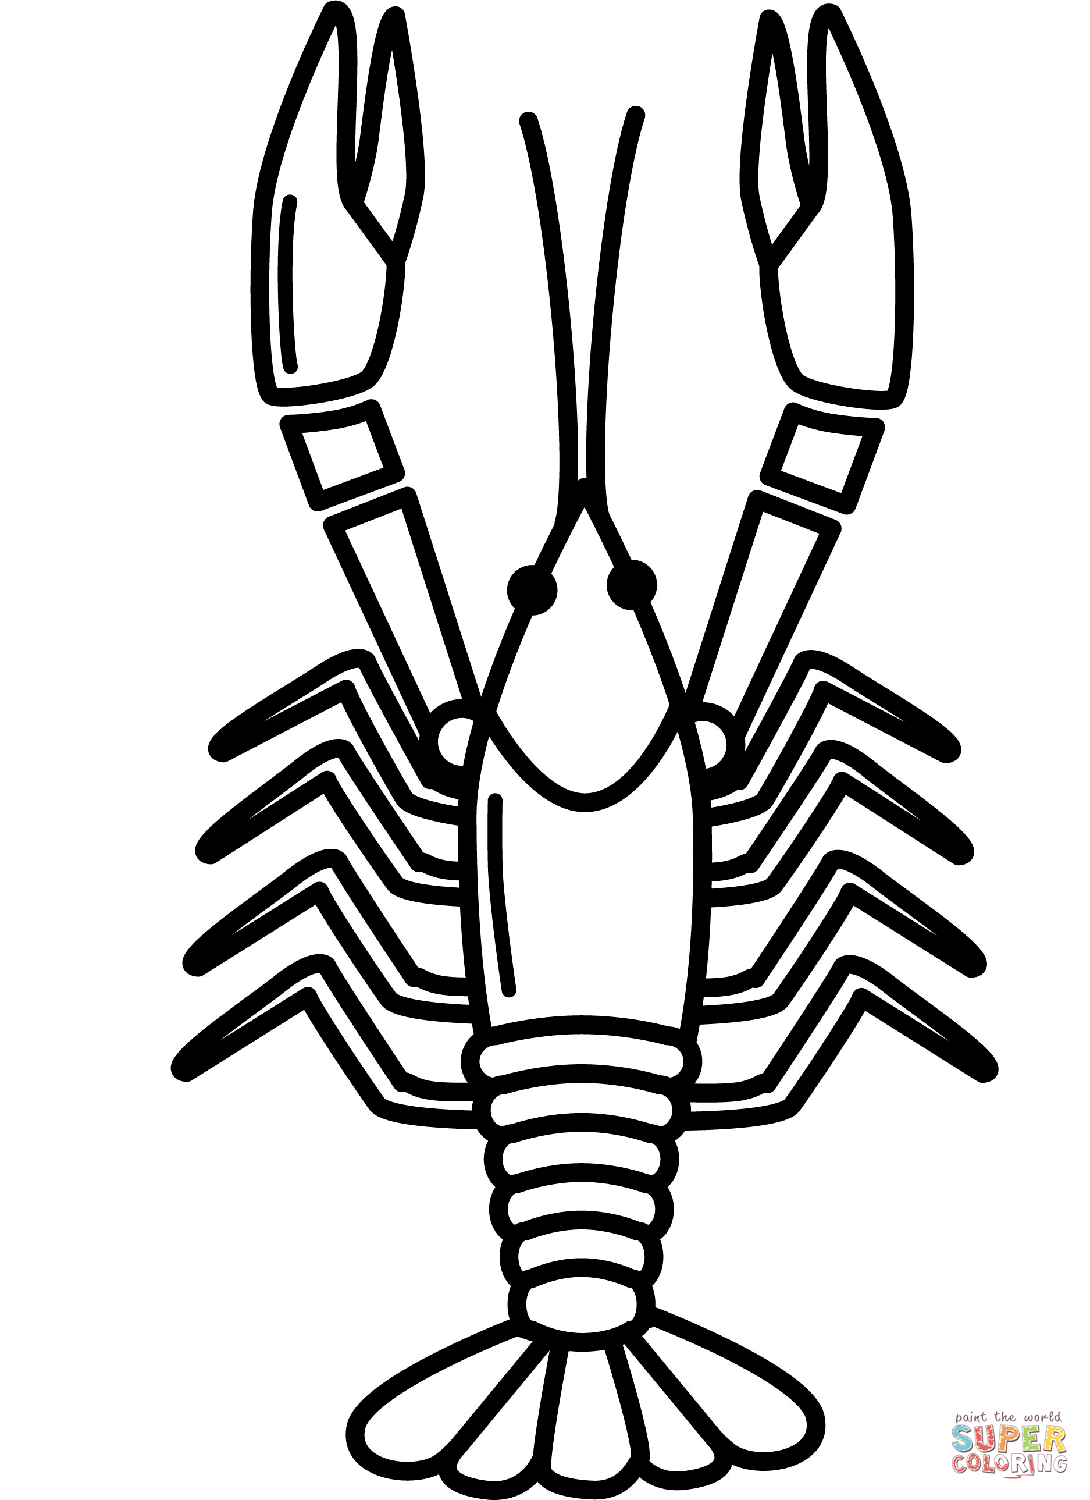 Cute Crawfish coloring page